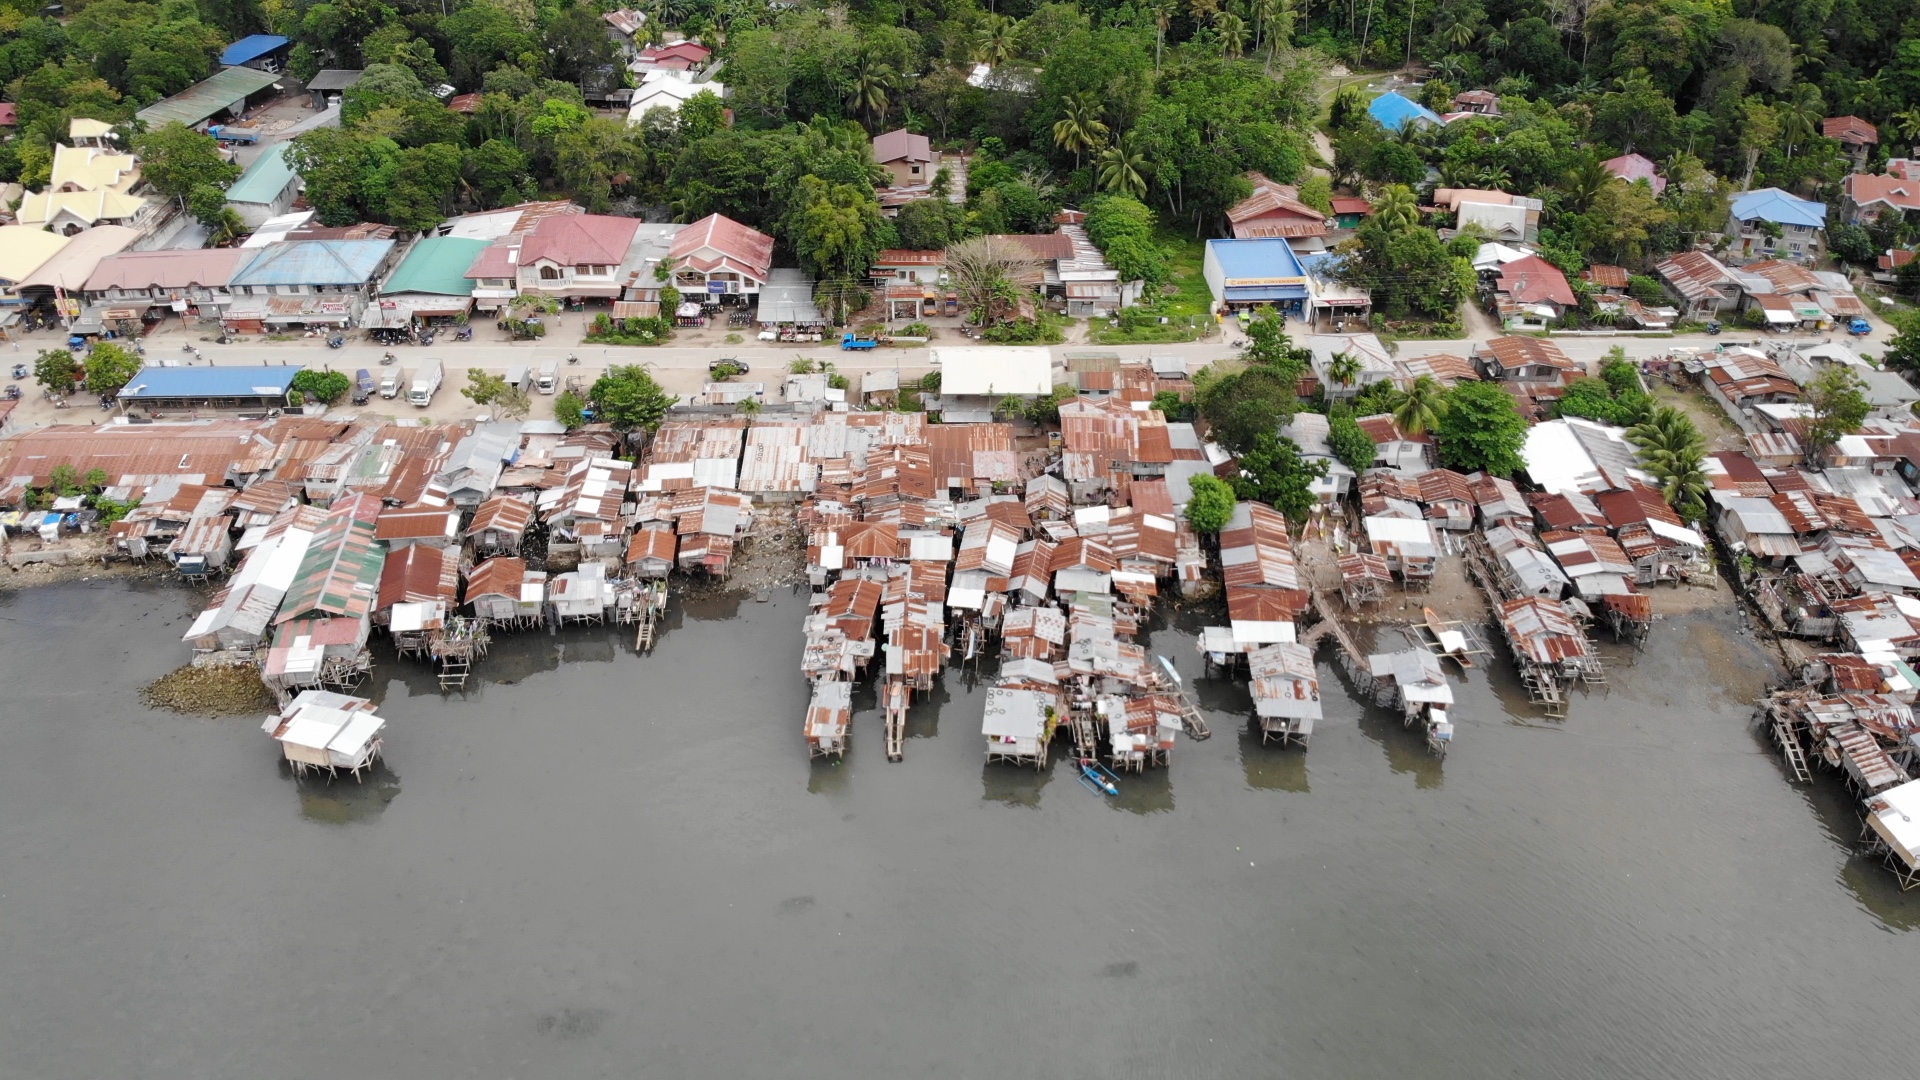 Drone Panorama of a Fishing Village on Gloomy Day